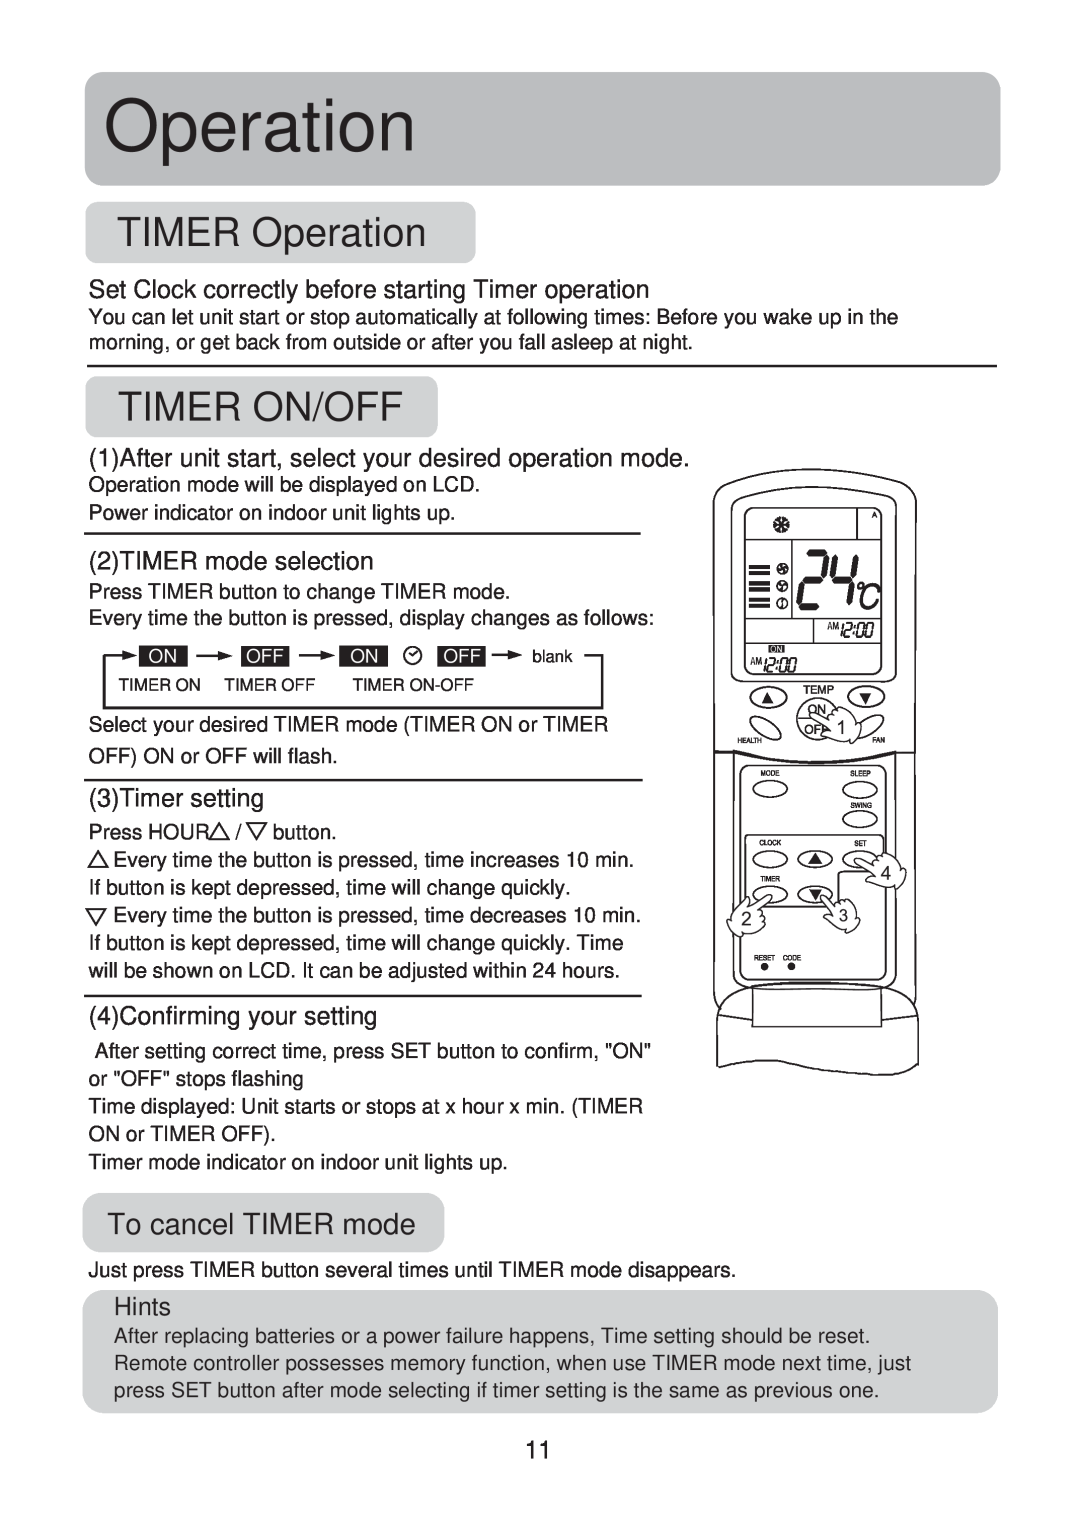 Haier HSU-18CK13(T3) TIMER Operation, Timer On/Off, To cancel TIMER mode, 2TIMER mode selection, 3Timer setting, Hints 